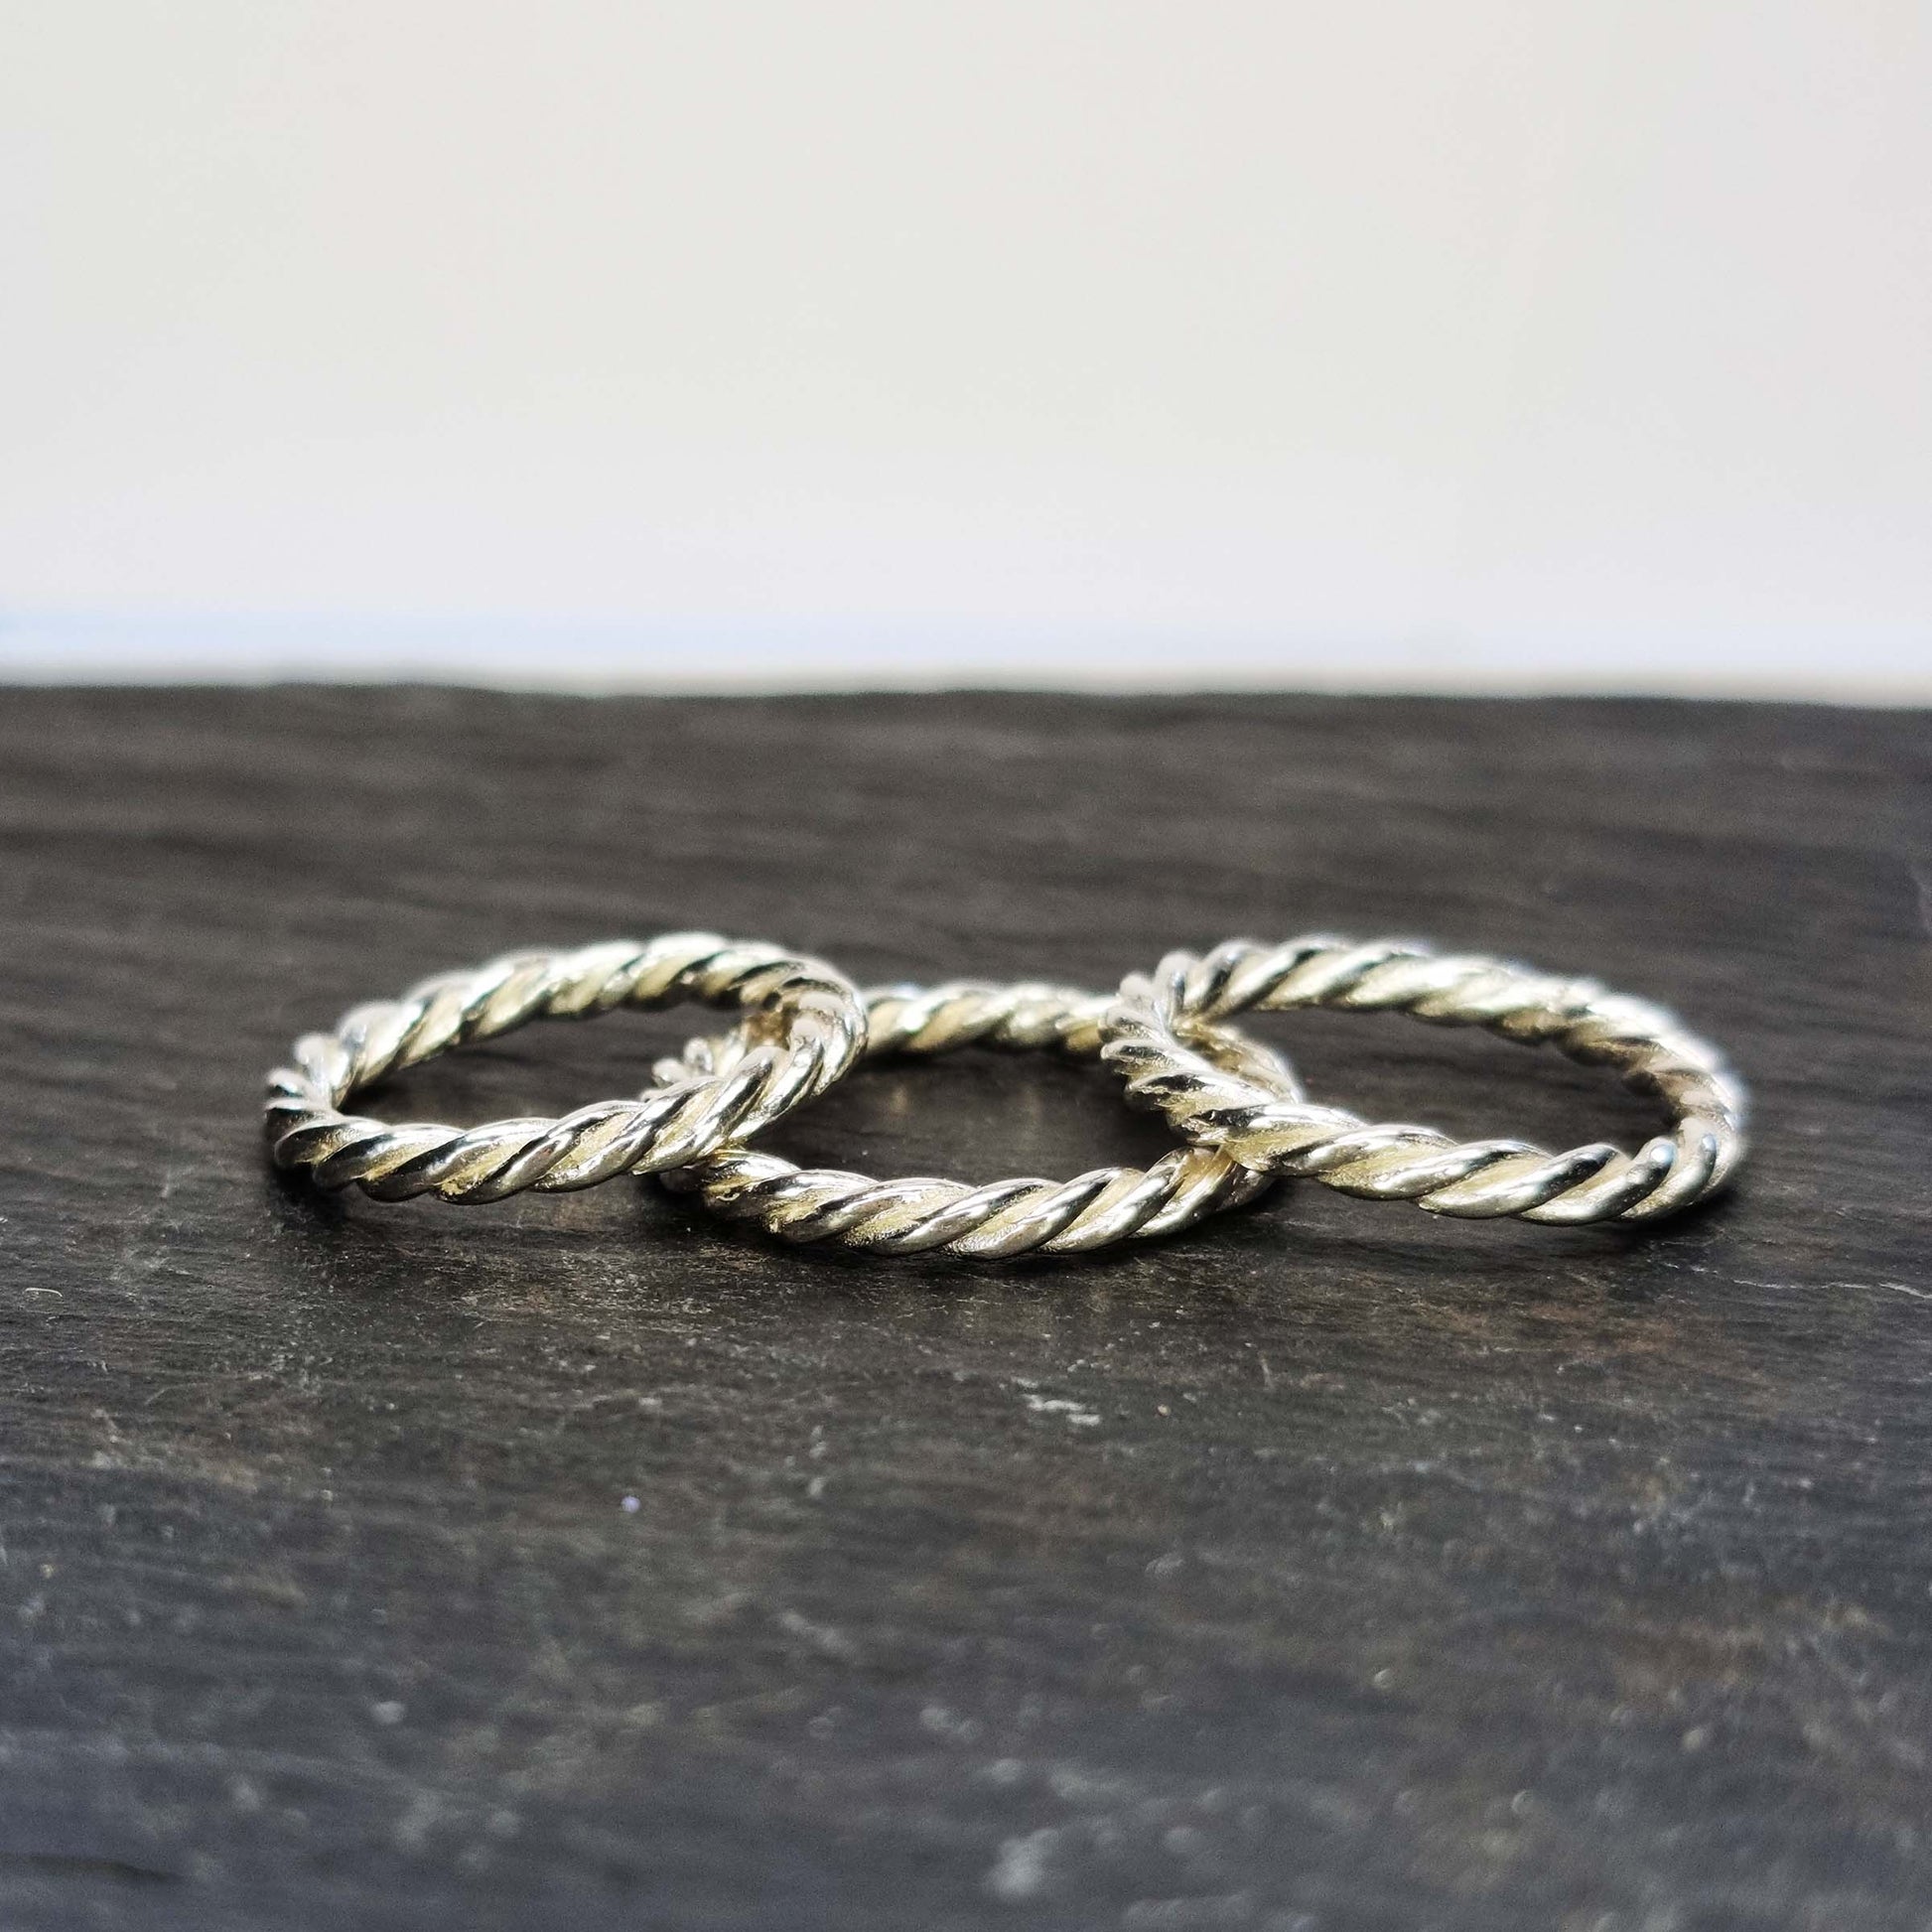 Silver twisted rope rings.